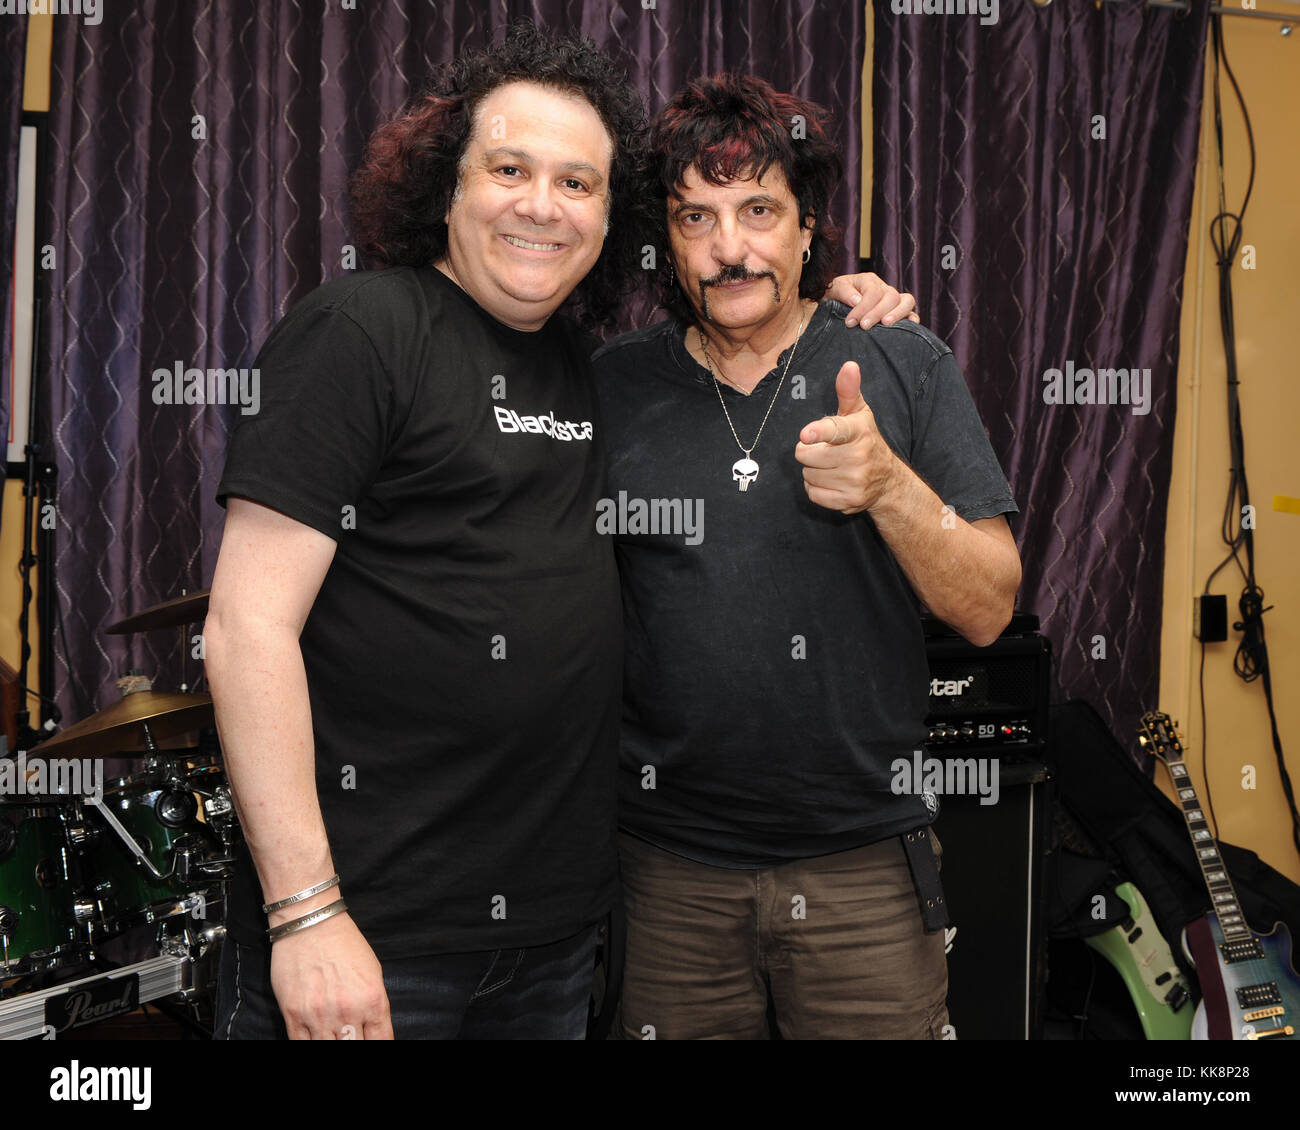 FORT LAUDERDALE, FL - MARCH 04: Carmine Appice and Steve Price perform at Rips Sports Bar and Grill. Carmine Appice is an American drummer and percussionist most commonly associated with the rock genre of music. Steve Price has played with such legendary musicians as Greg Allman, Dom um Ramao, Les Paul, Ray Gillan, Carmine Appice, Mike Portnoy, Ian Lloyd, Paul Morris, and Micheal Brecker on March 4, 2016 in Fort Lauderdale, Florida   People:  Carmine Appice, Steve Price Stock Photo